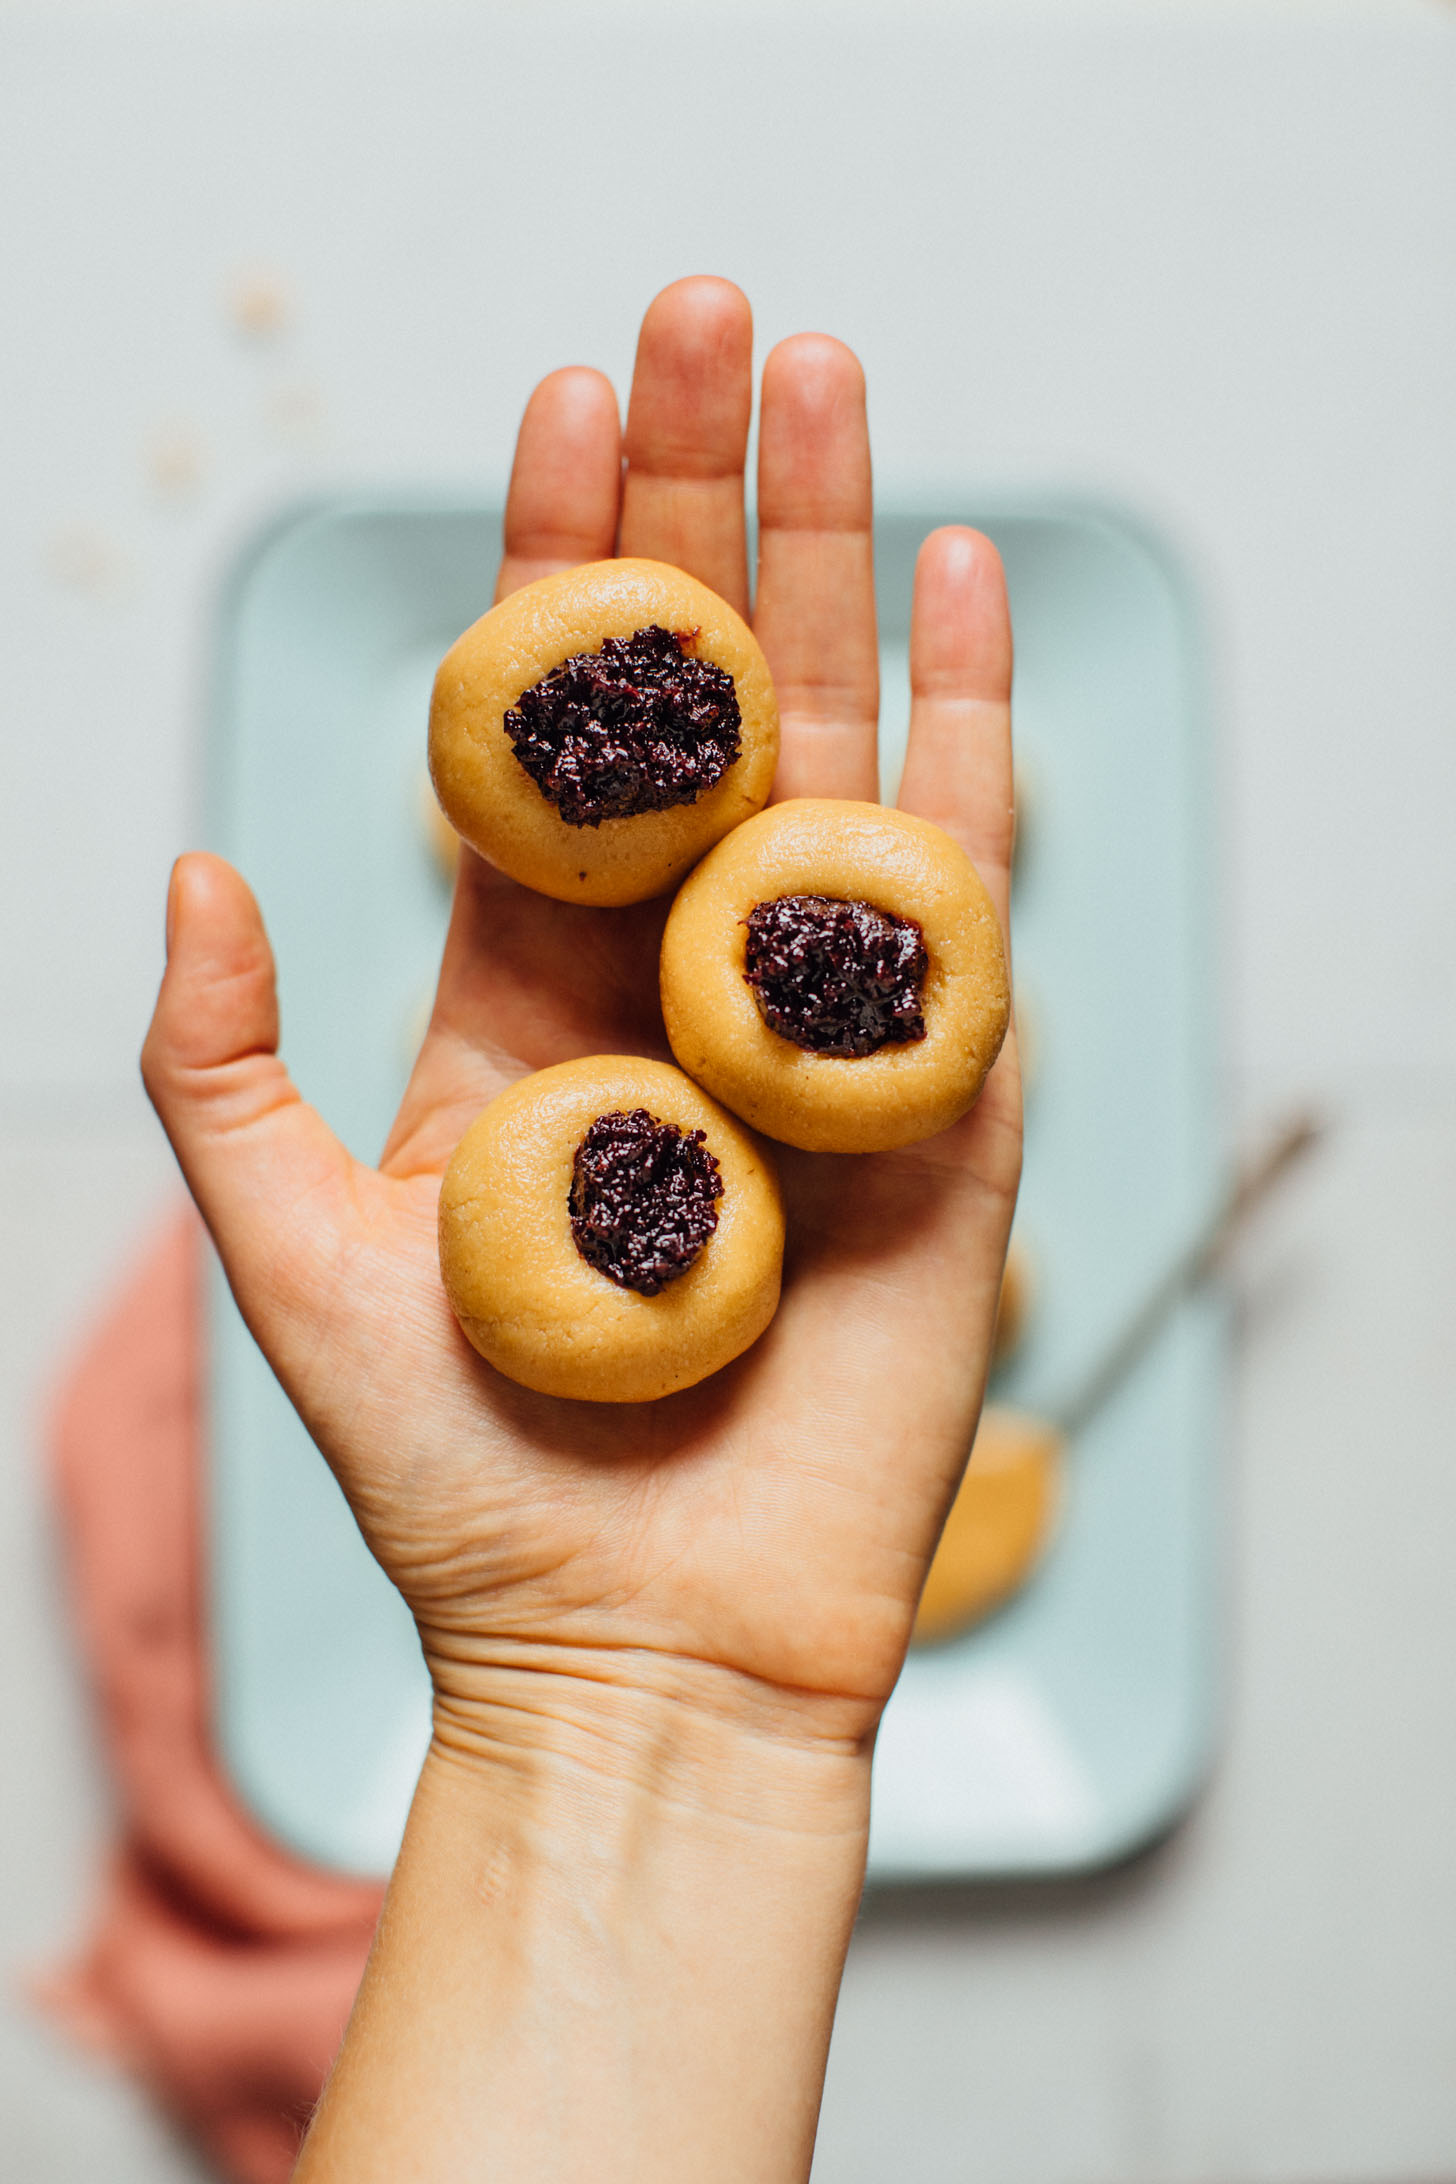 Holding three of our gluten-free vegan No Bake Peanut Butter Thumbprint Cookies